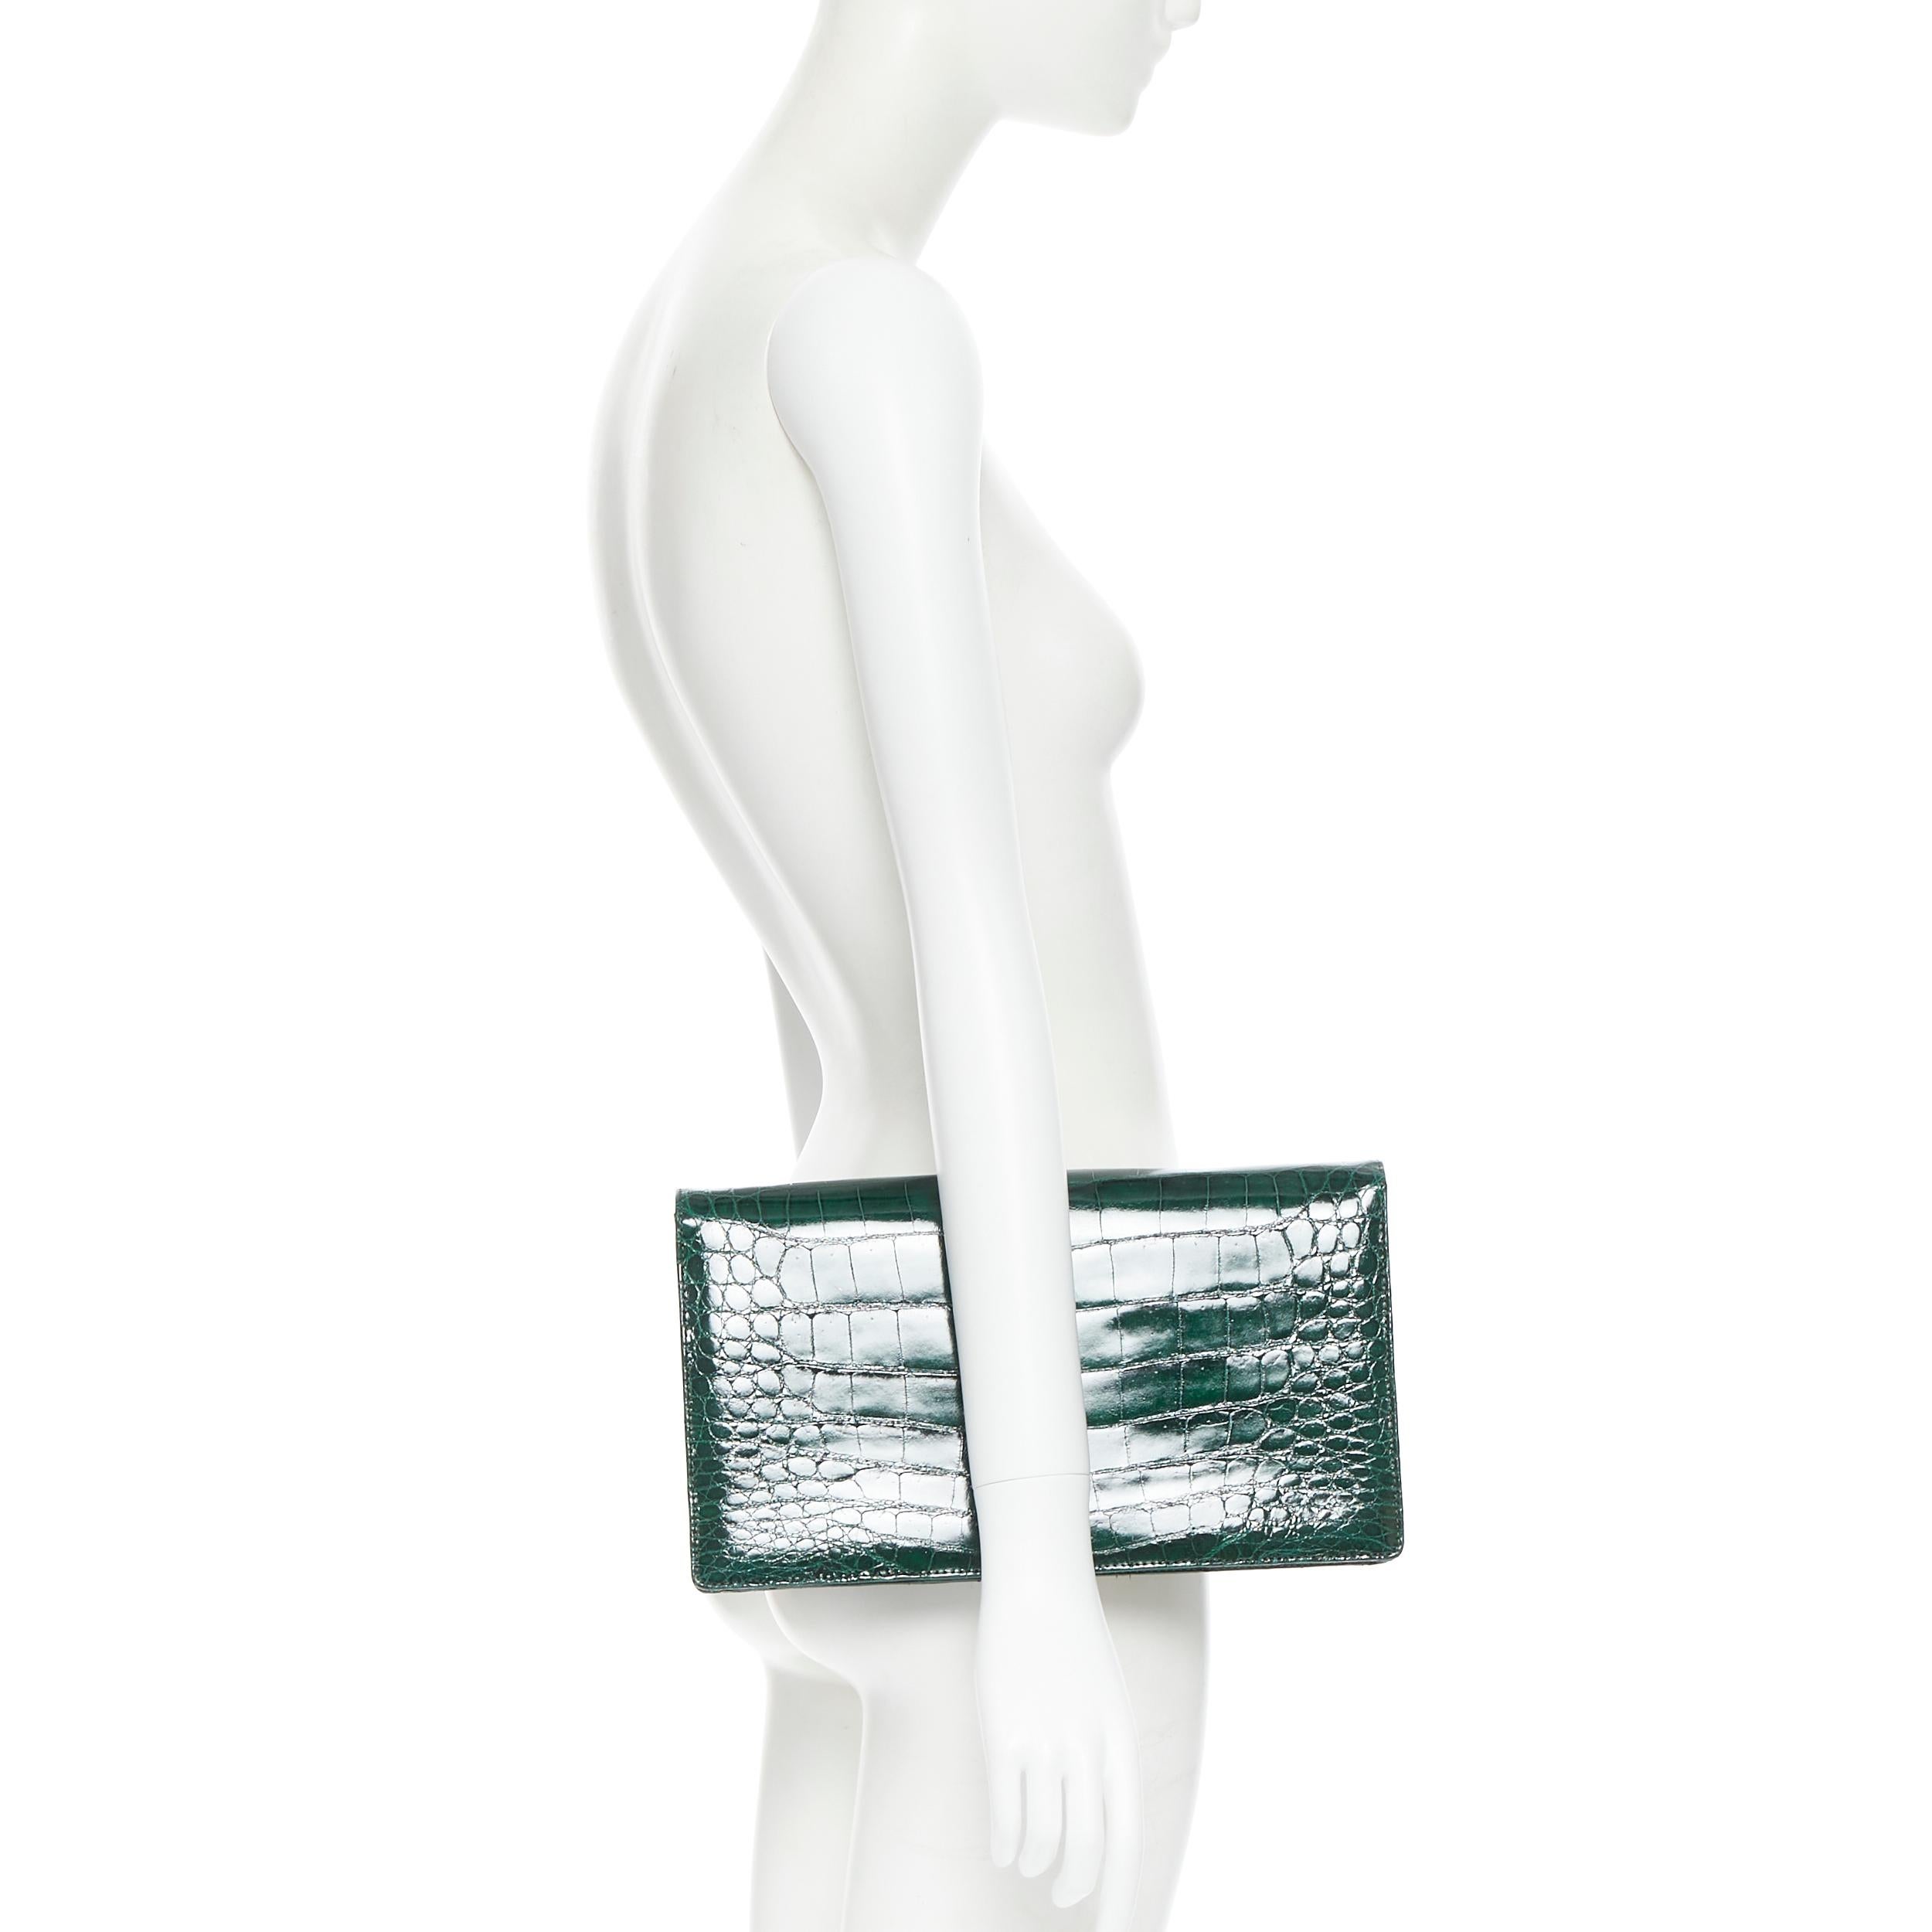 KATIANA kelly emerald green genuine crocodile leather rectangular clutch bag Reference: LNKO/A01774 
Brand: Katiana 
Model: Crocodile clutch 
Material: Leather 
Color: Green 
Pattern: Solid 
Closure: Magnetic 
Extra Detail: Genuine crocodile